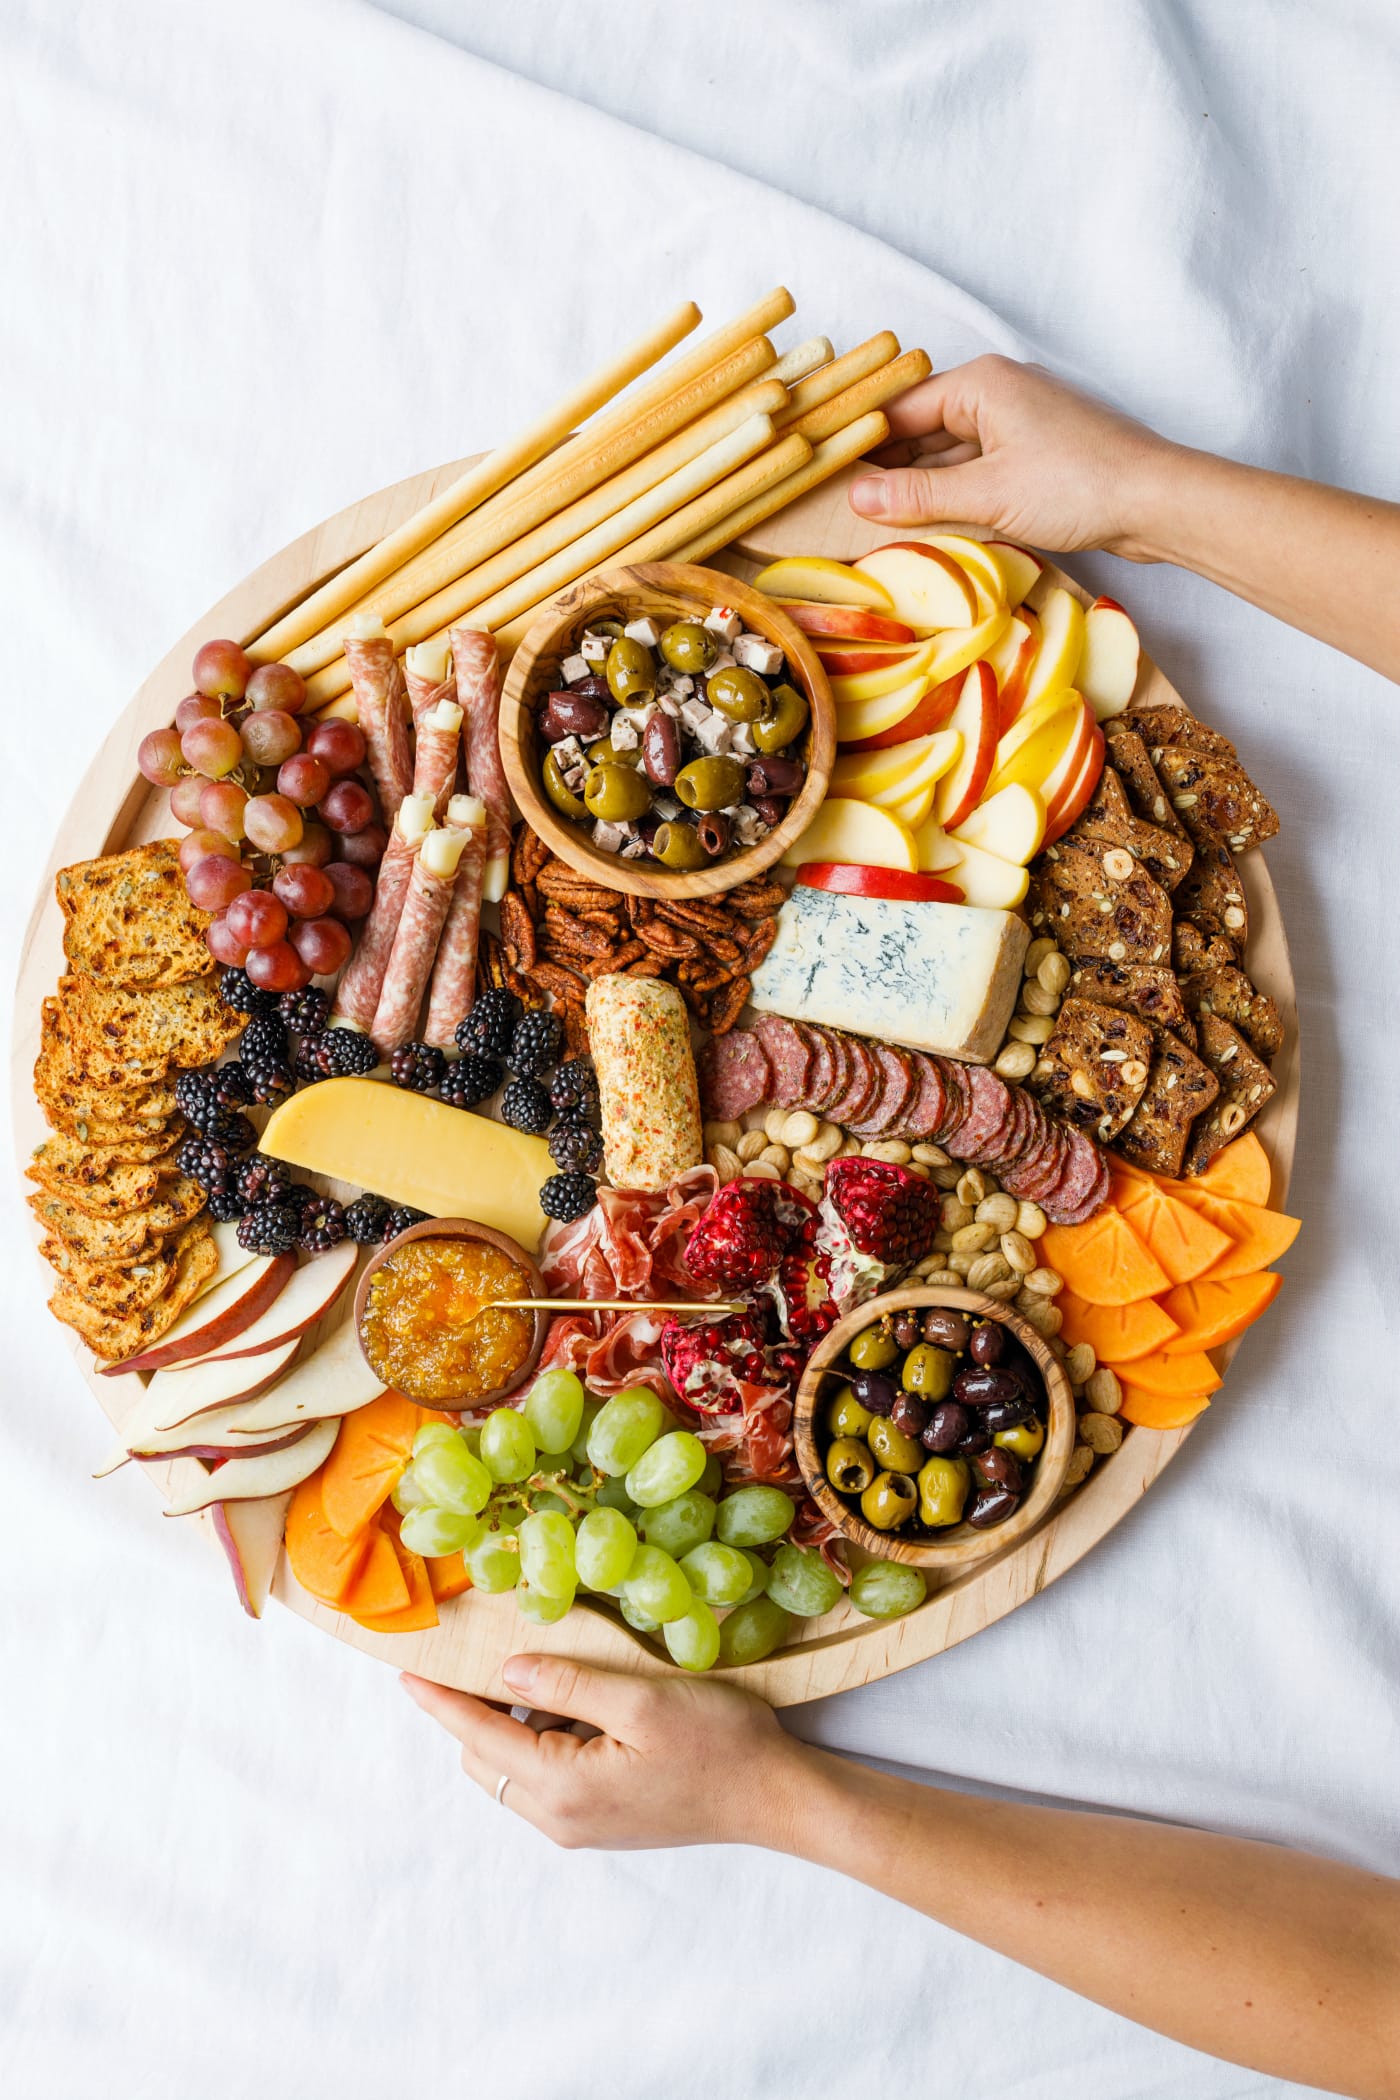 Fruit and Cheese Board Recipe: How to Make It